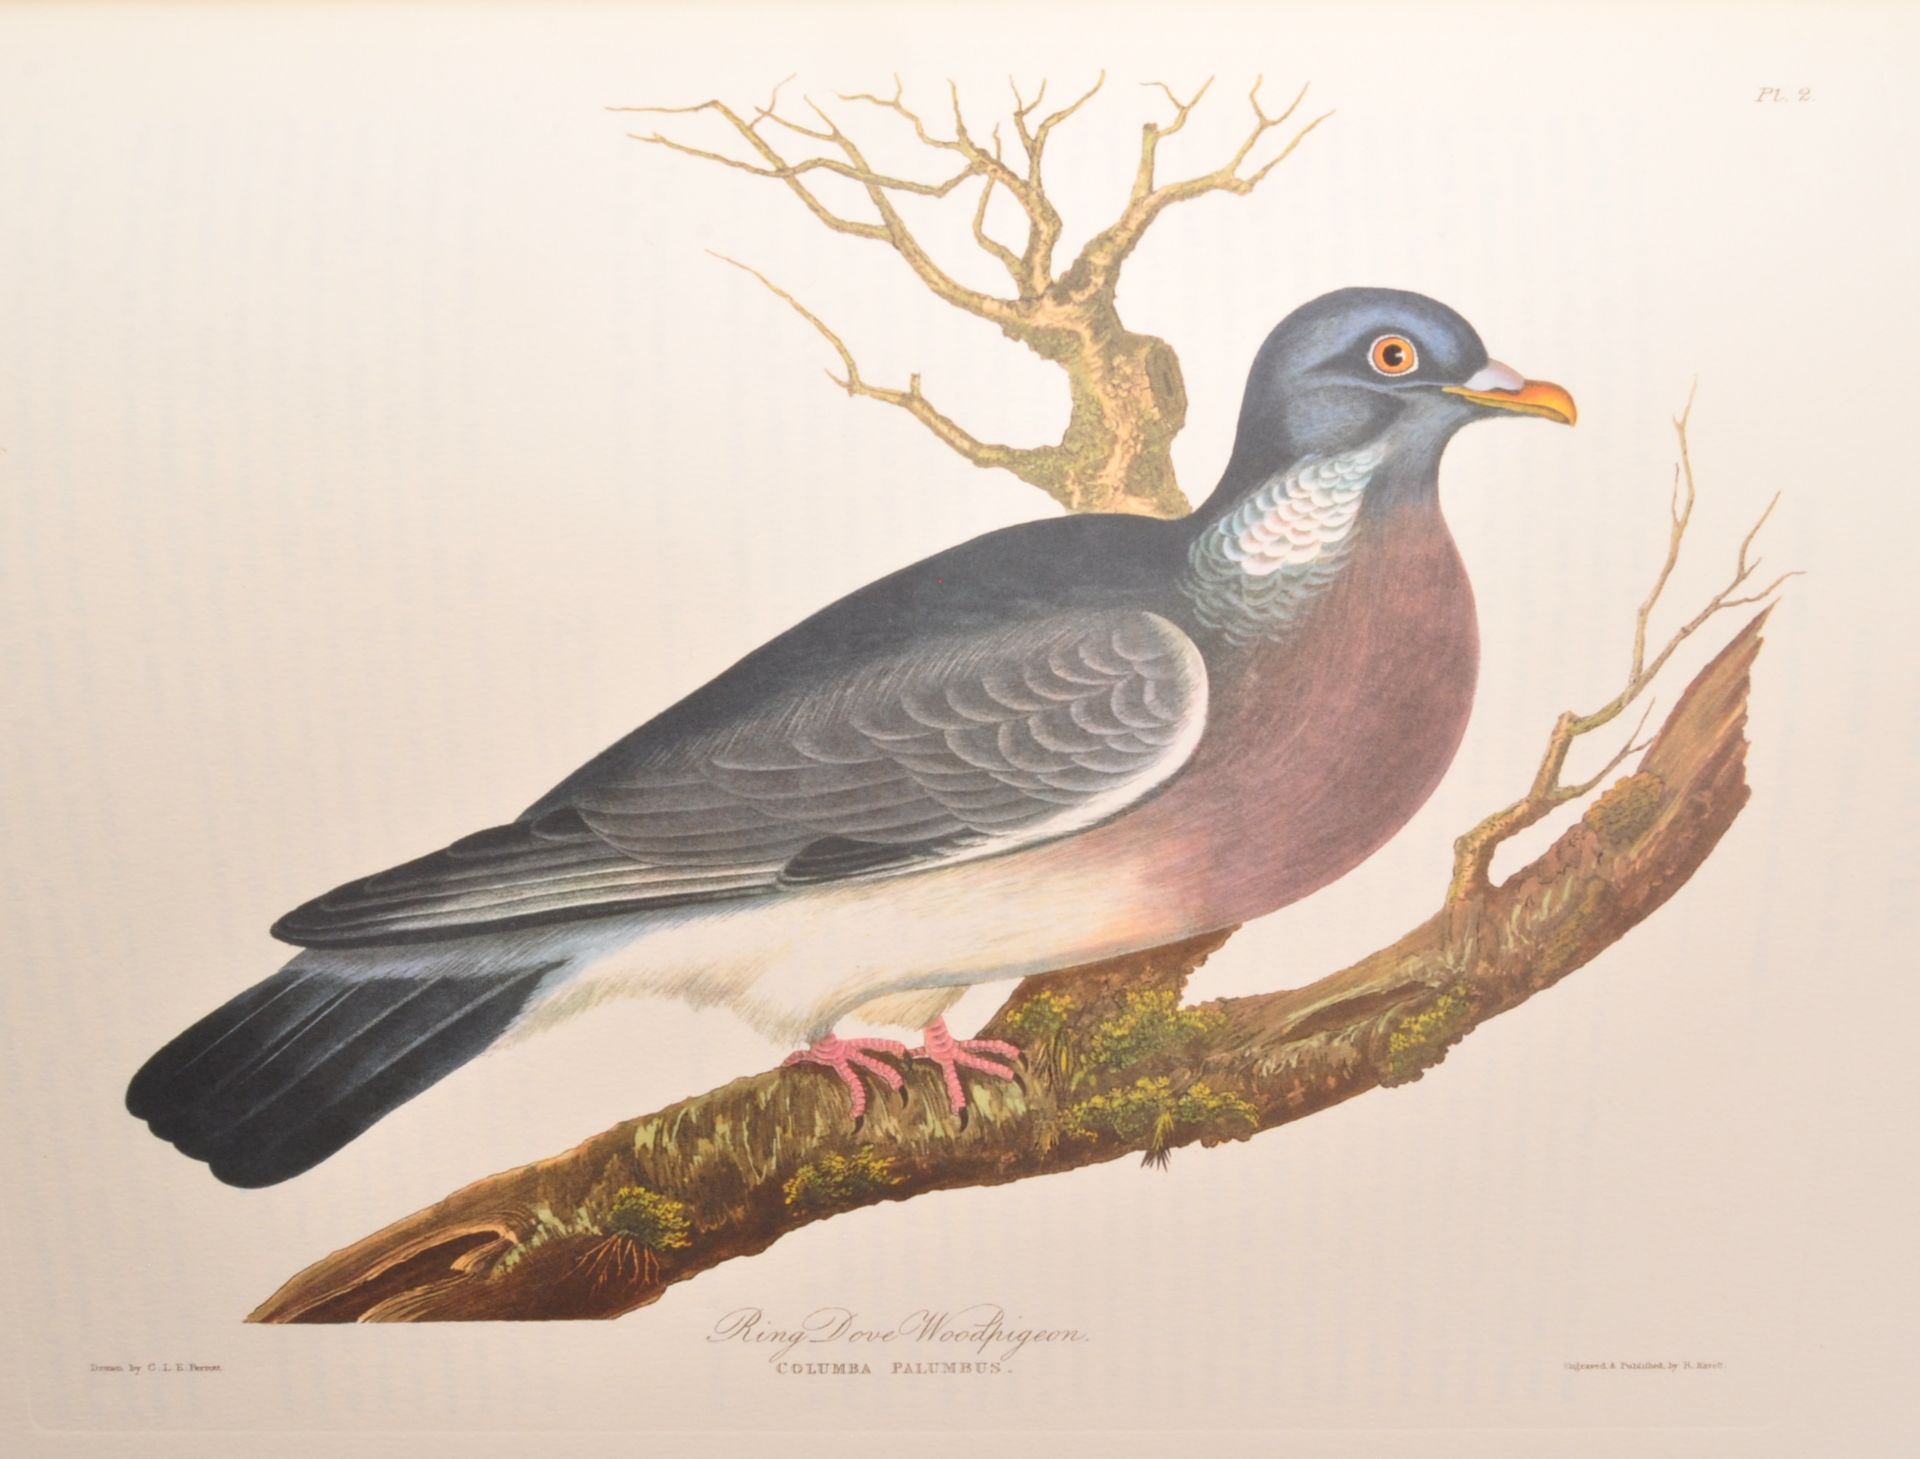 GAME BIRDS & PART 1 SELECTION OF BRITISH BIRDS LTD EDITION - Image 8 of 8